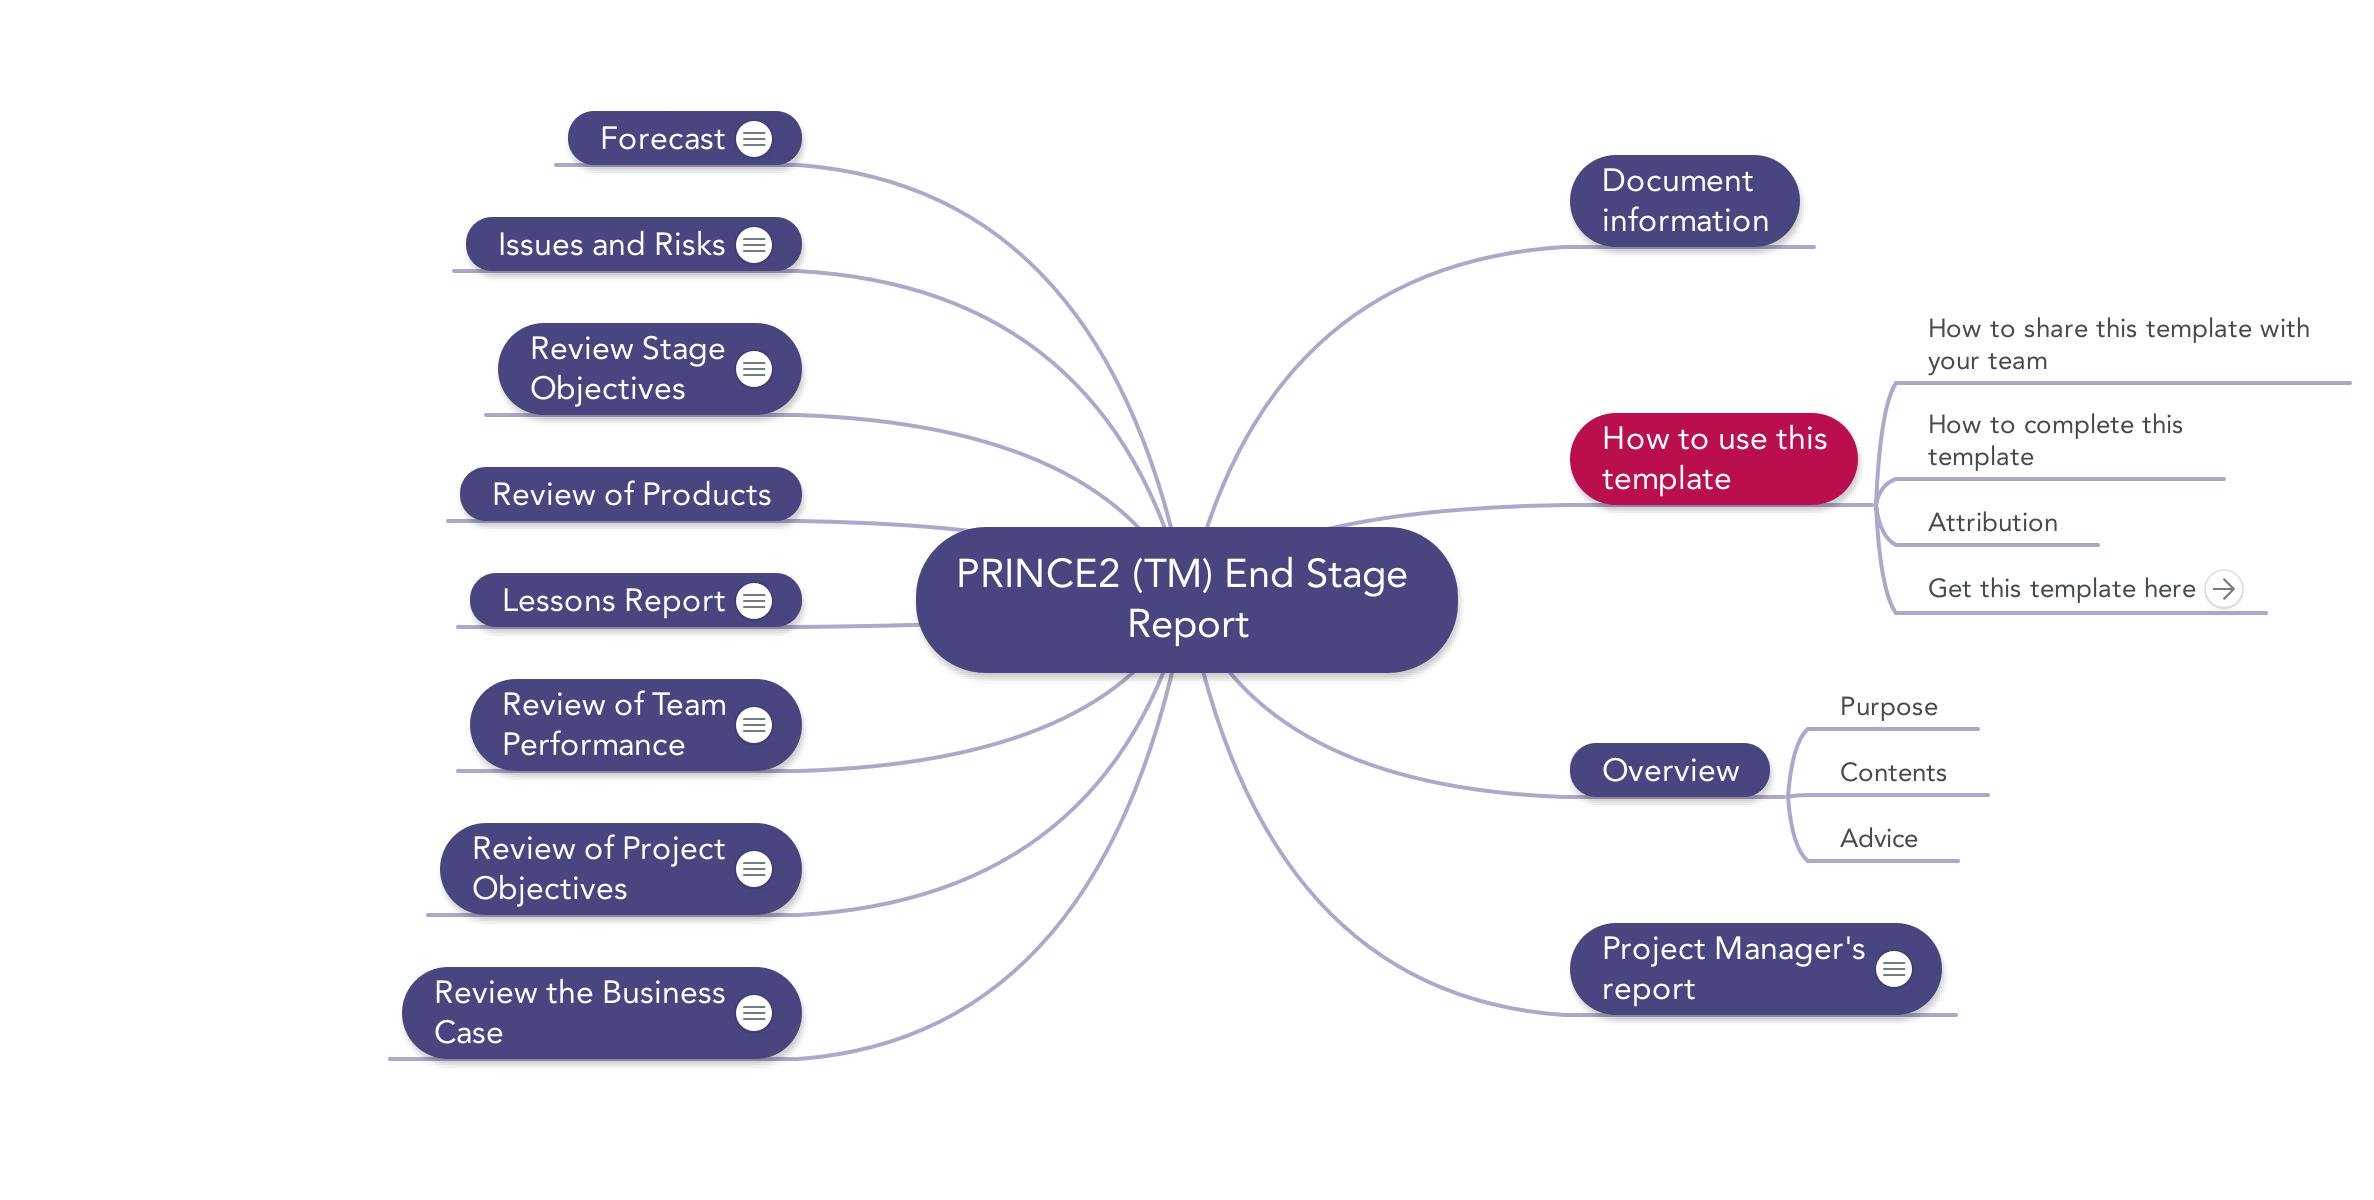 Prince2 End Stage Report | Download Template For Prince2 Lessons Learned Report Template